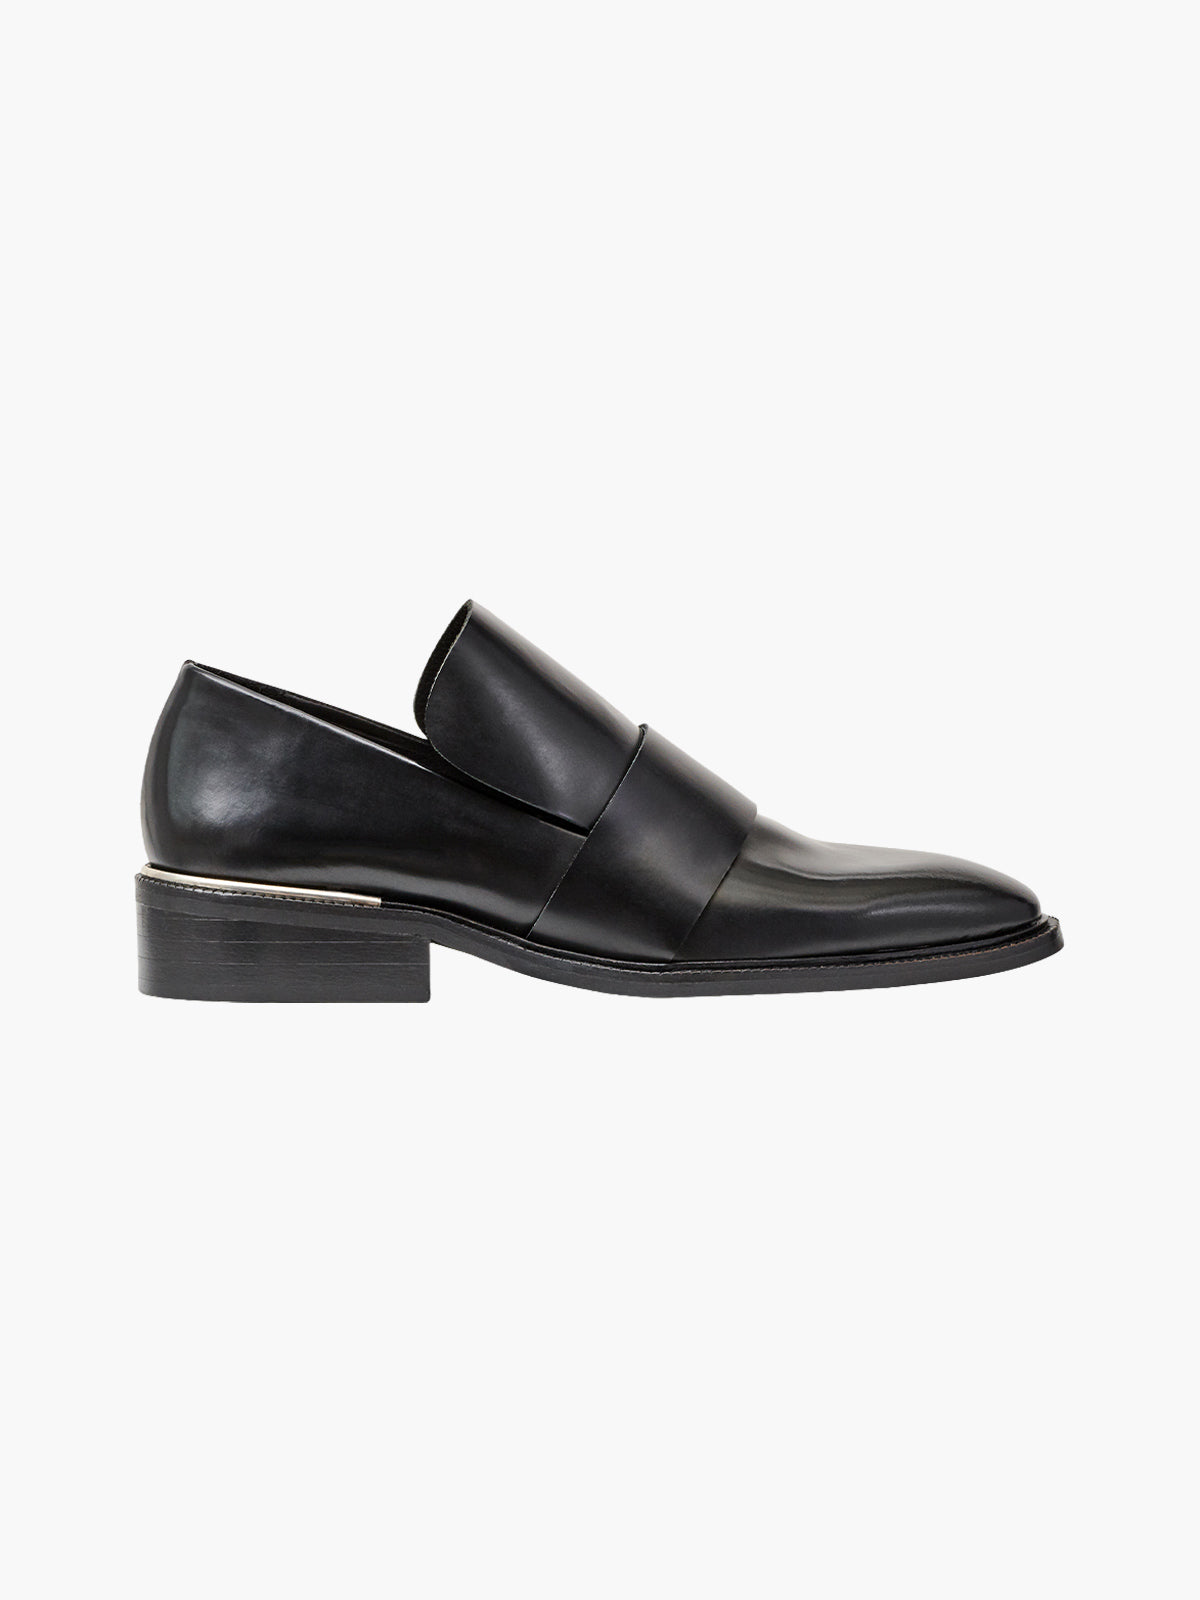 The Luxe Loafer The Luxe Loafer